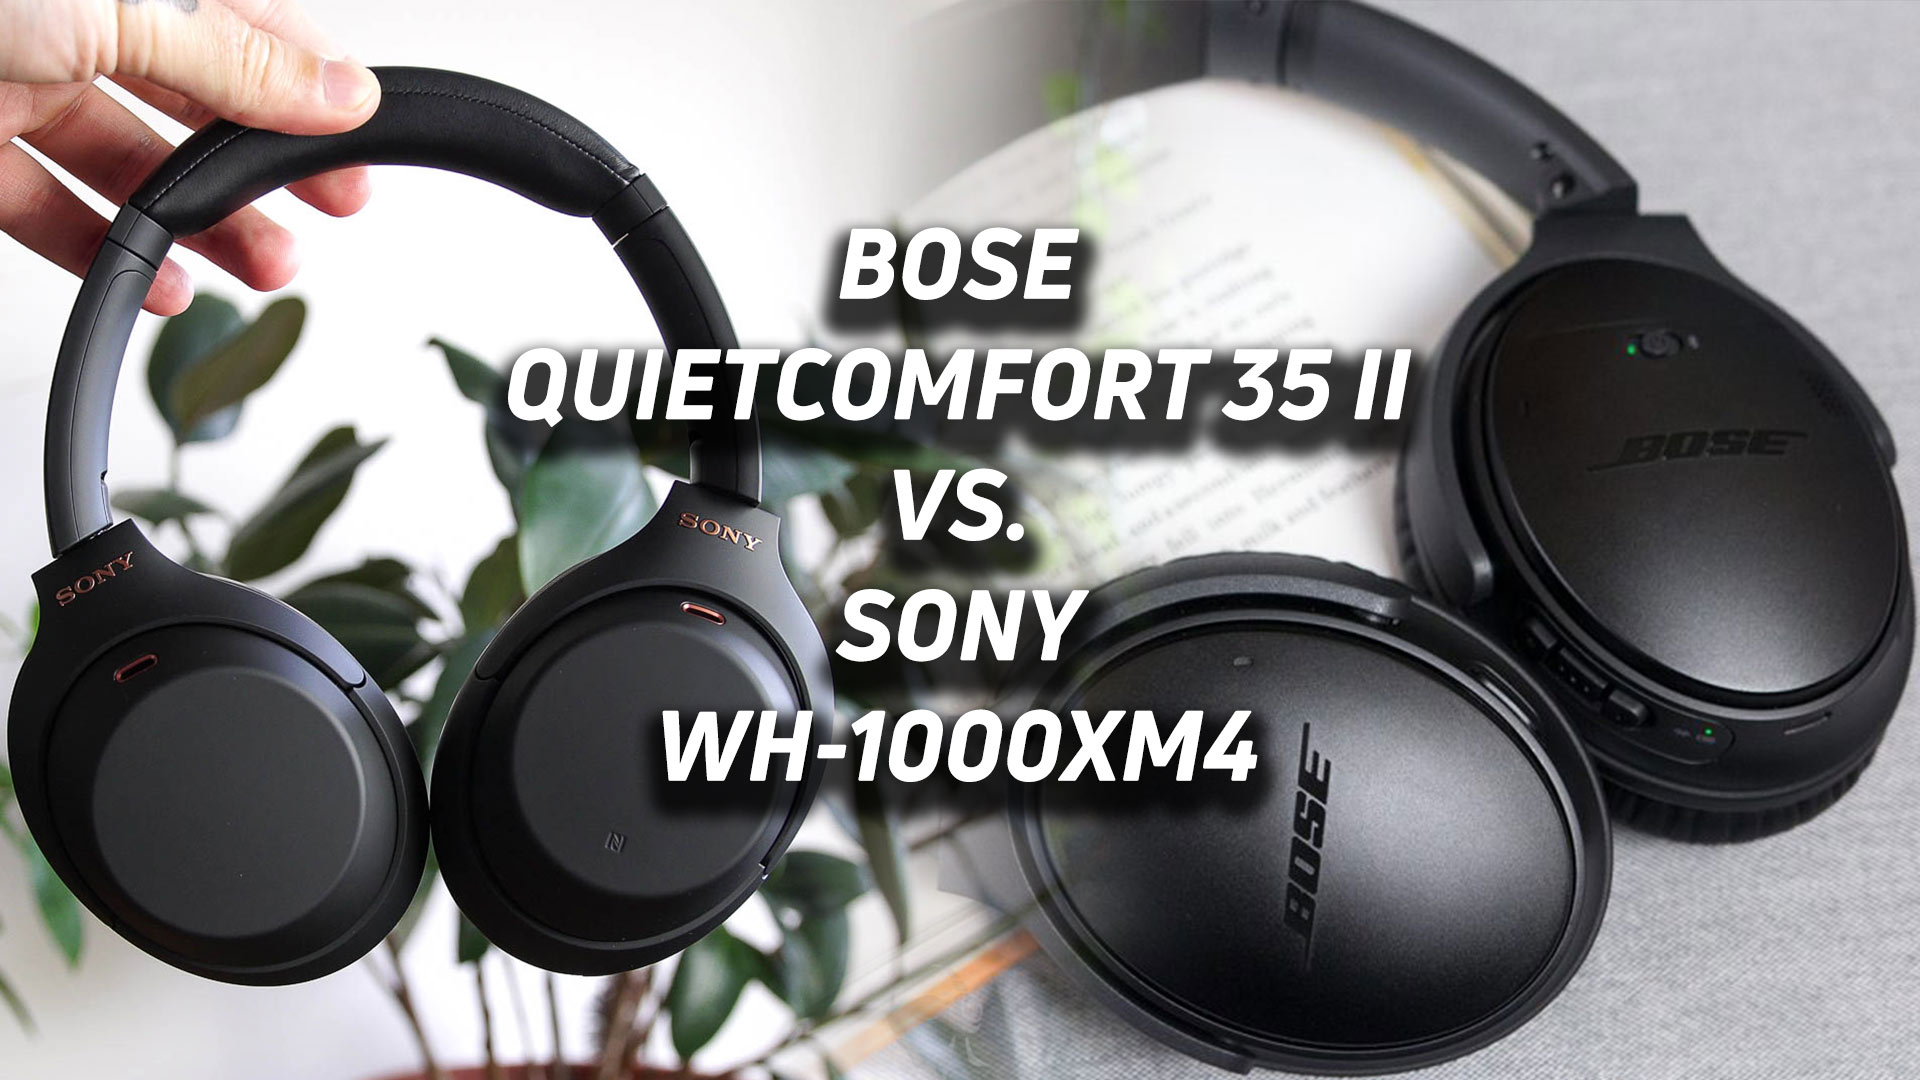 A blended image of the Bose QuietComfort 35 II vs Sony WH-1000XM4 with the respective text overlaid atop it.